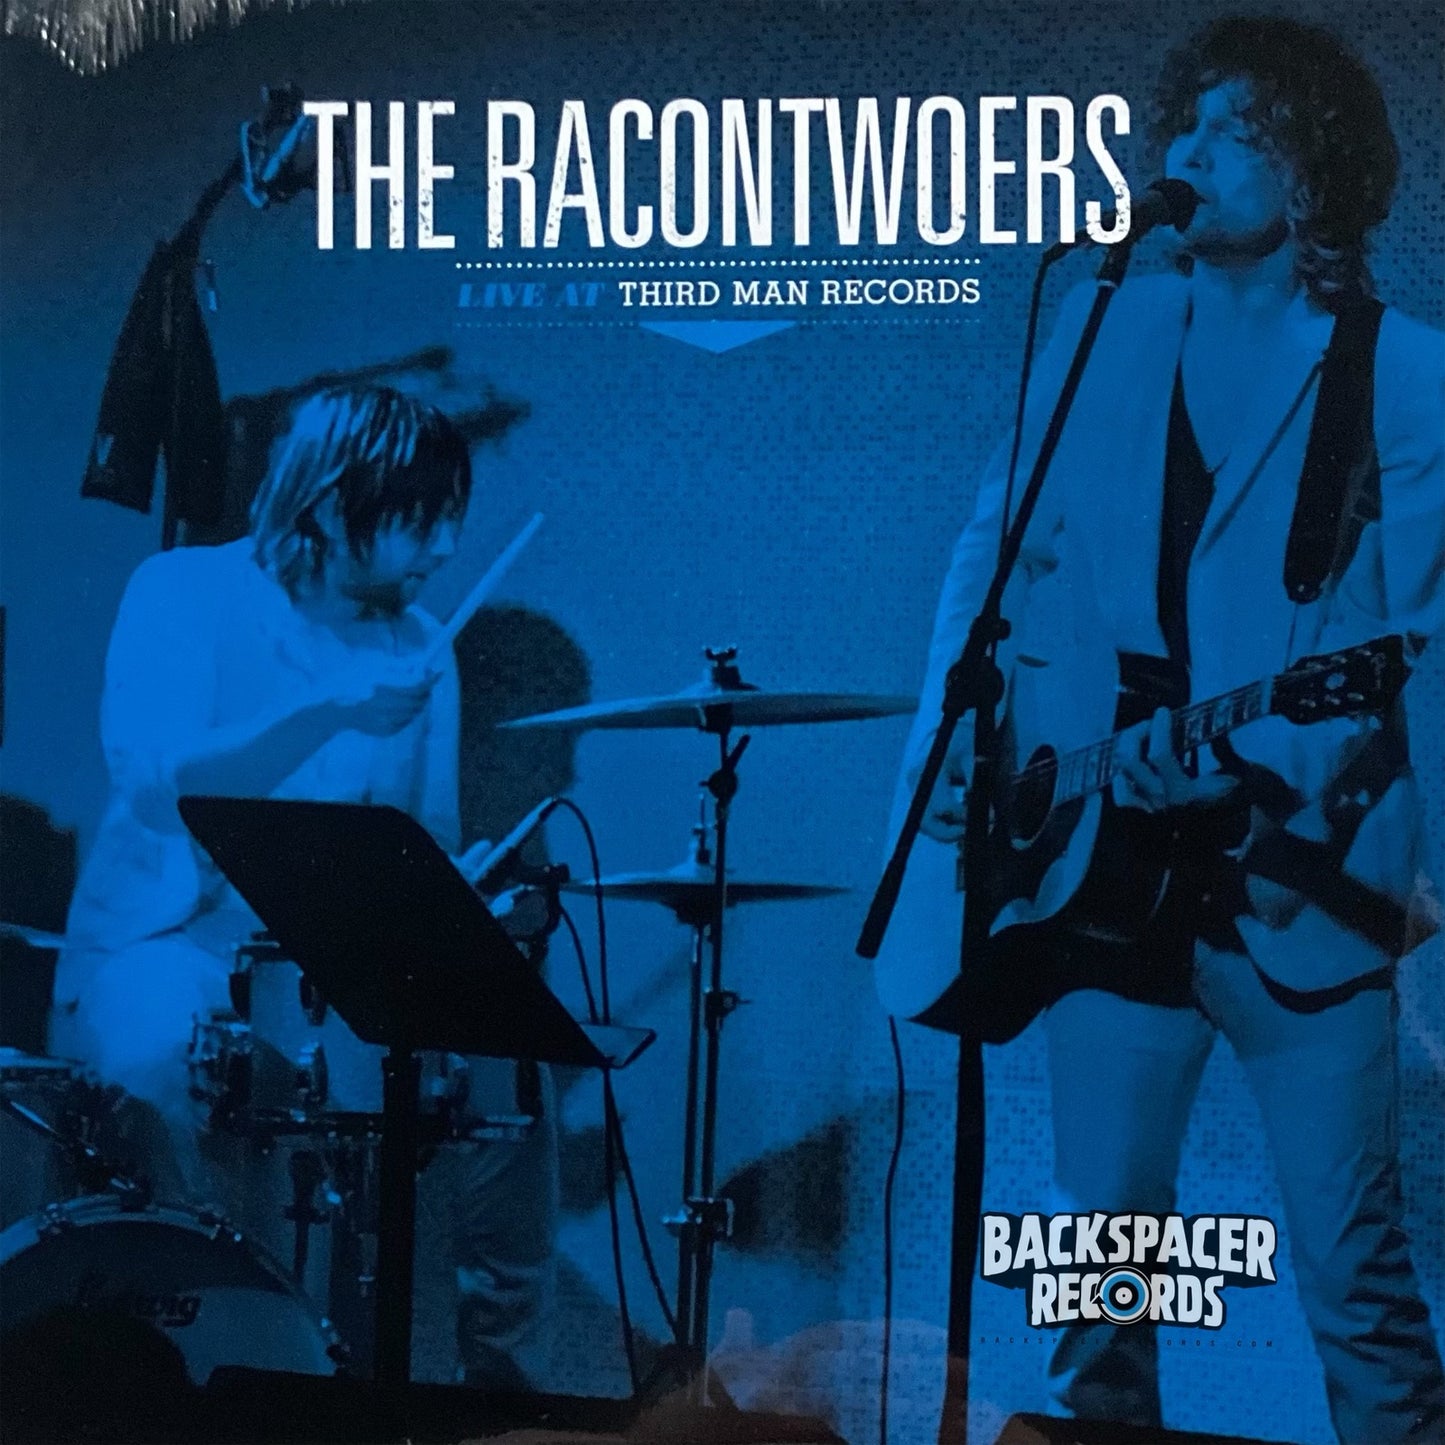 The Racontwoers – Live At Third Man Records LP (Sealed)